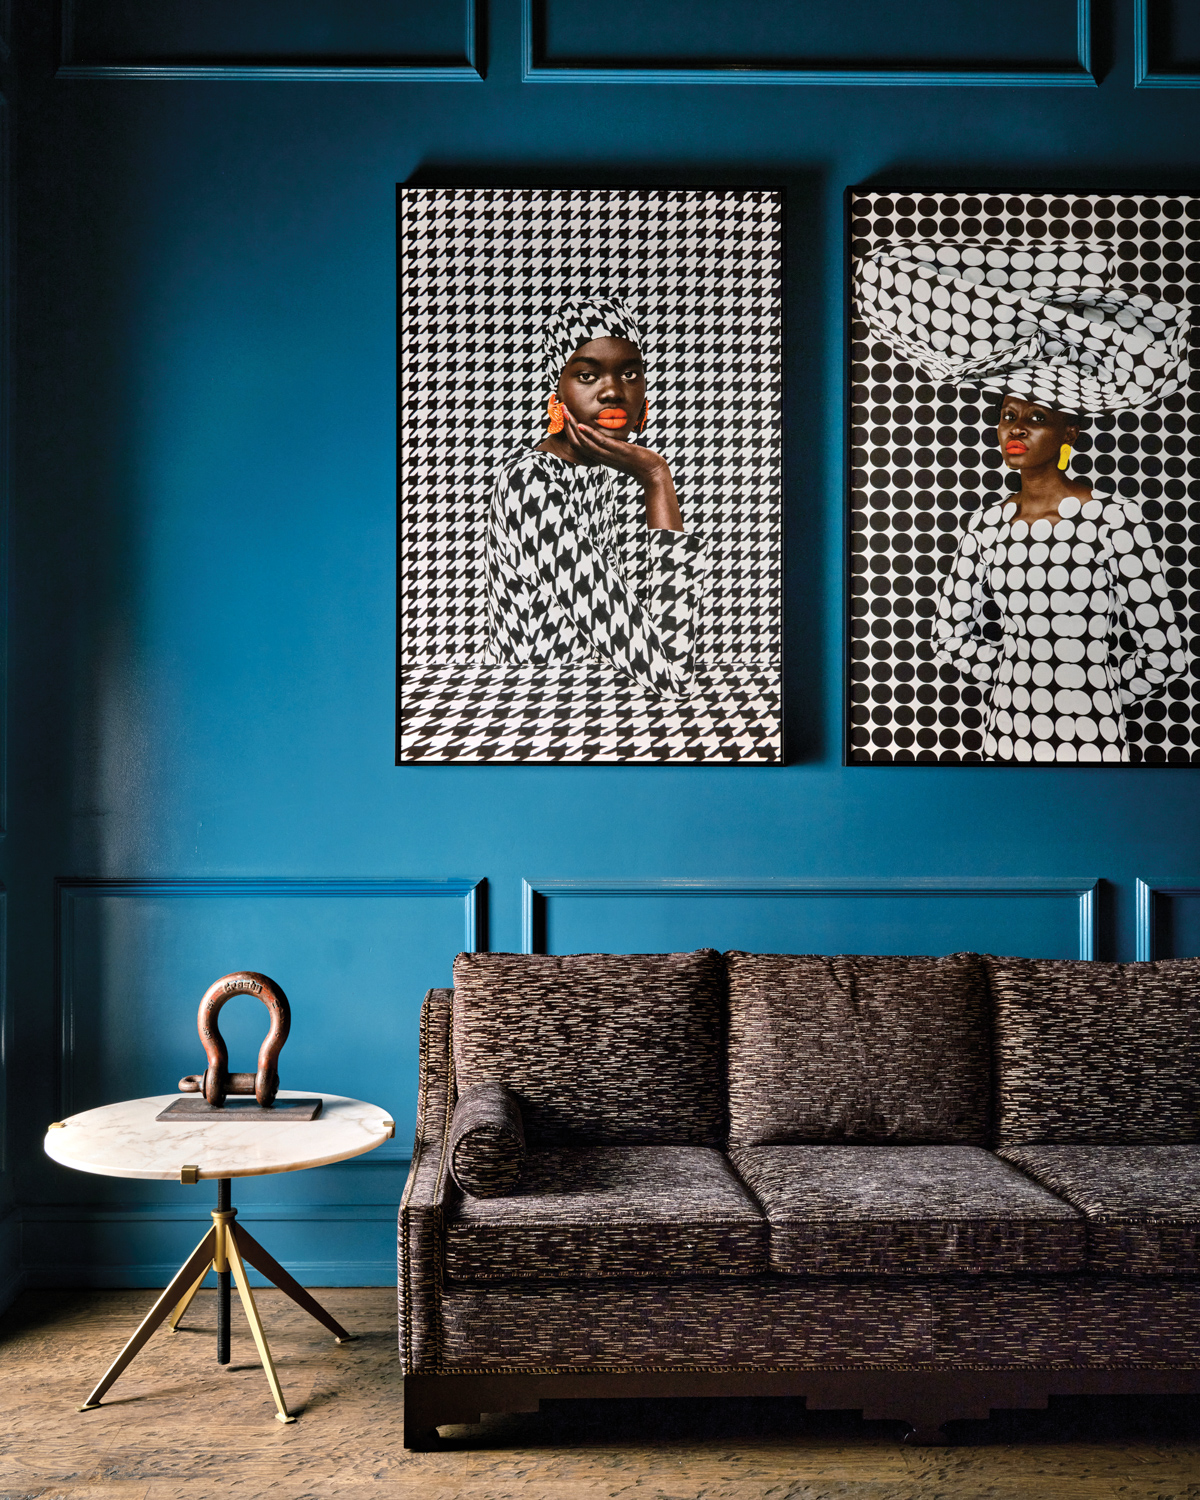 Two portraiture artworks above a sofa and against blue painted wall